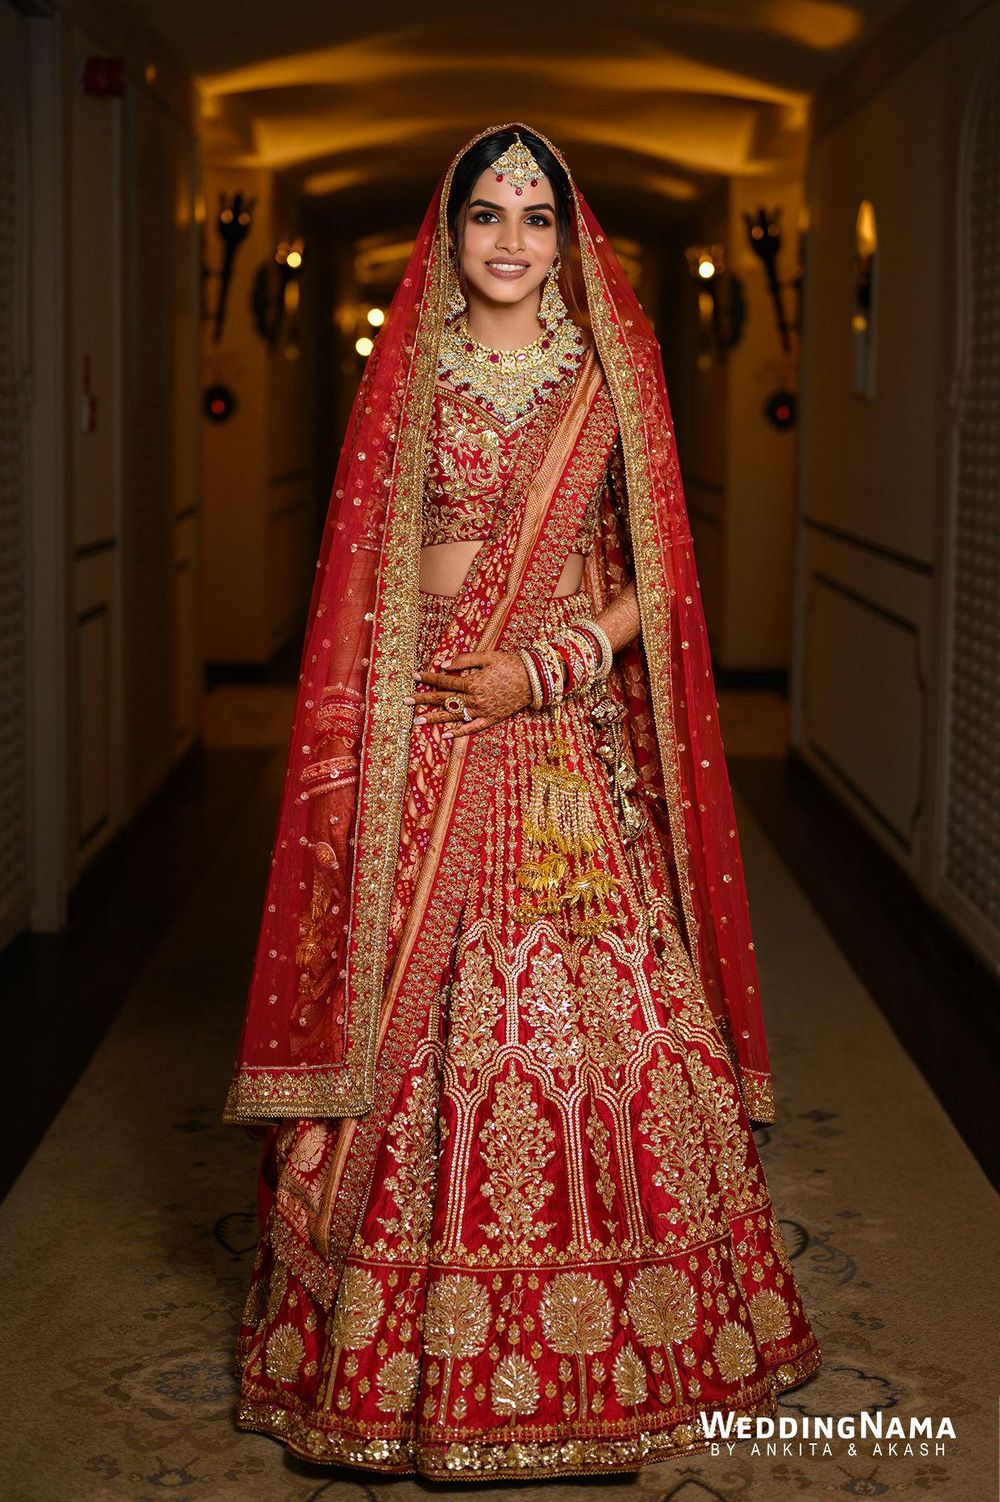 Photo of bride in traditional red and gold bridal lehenga with double dupatta